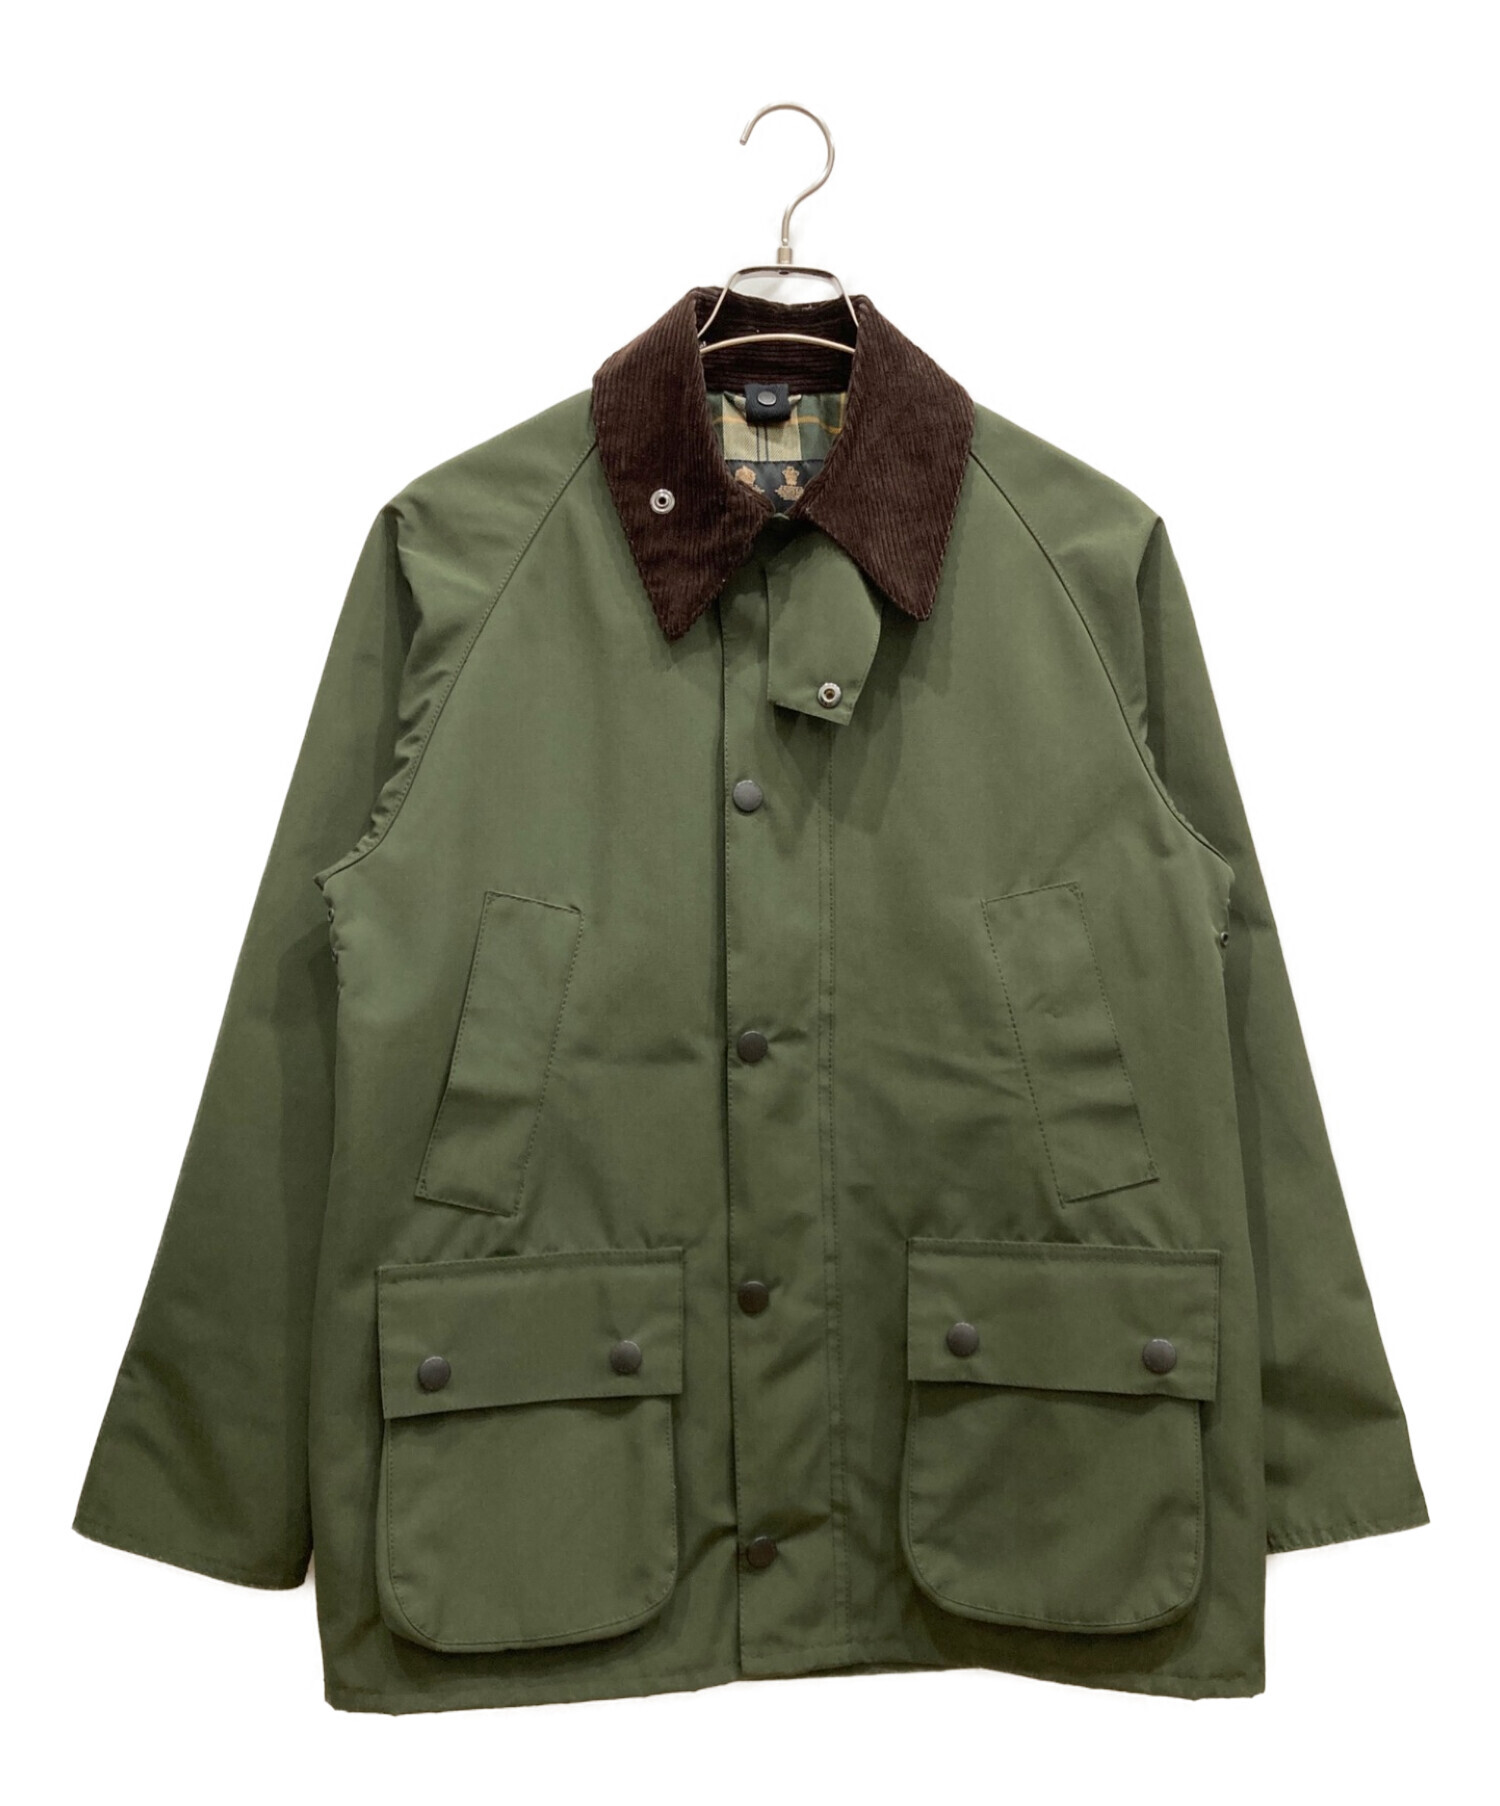 Barbour Bedale WP BEAMS Plus宜しくお願い致します